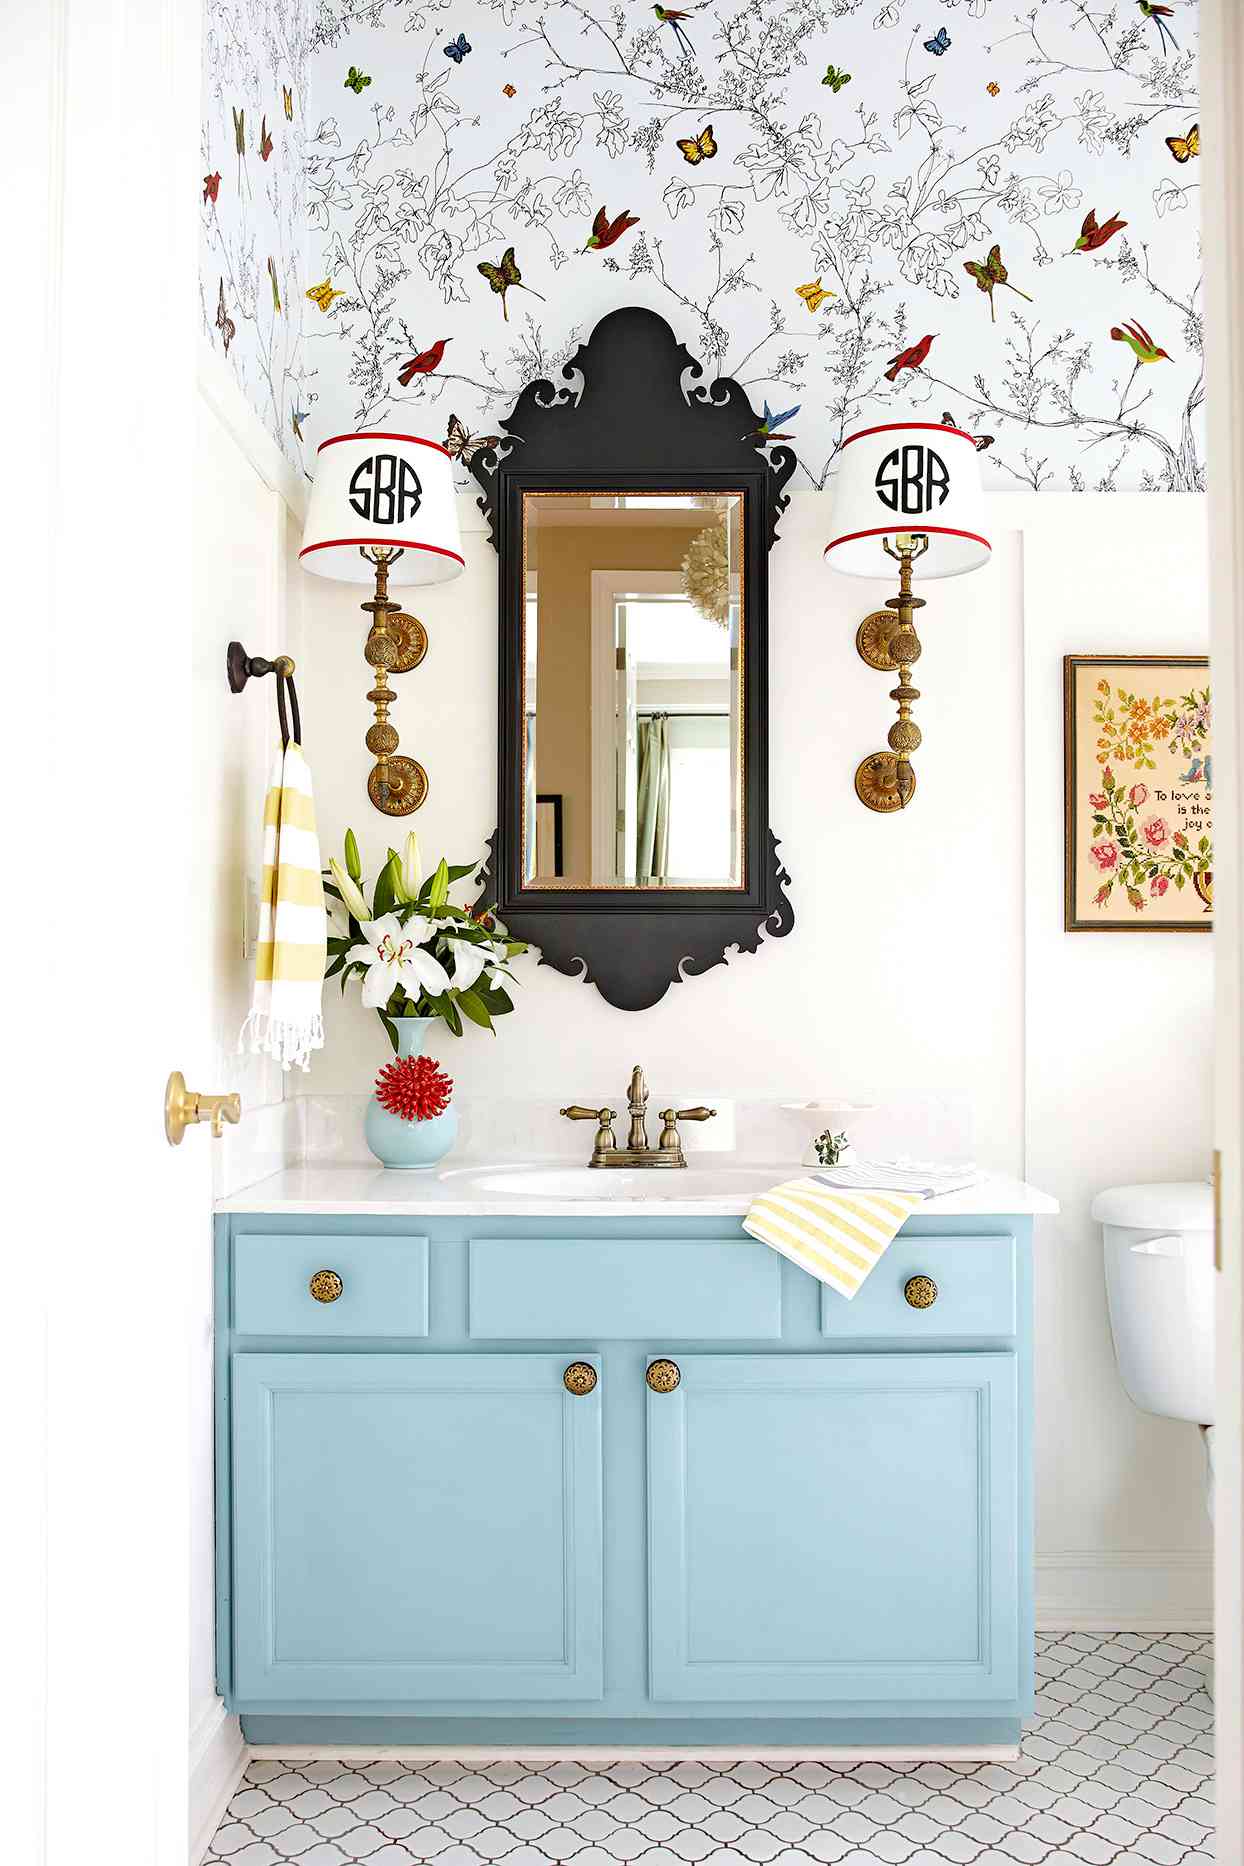 13 Before And After Vanity Makeovers, Refinishing Bathroom Cabinets Ideas